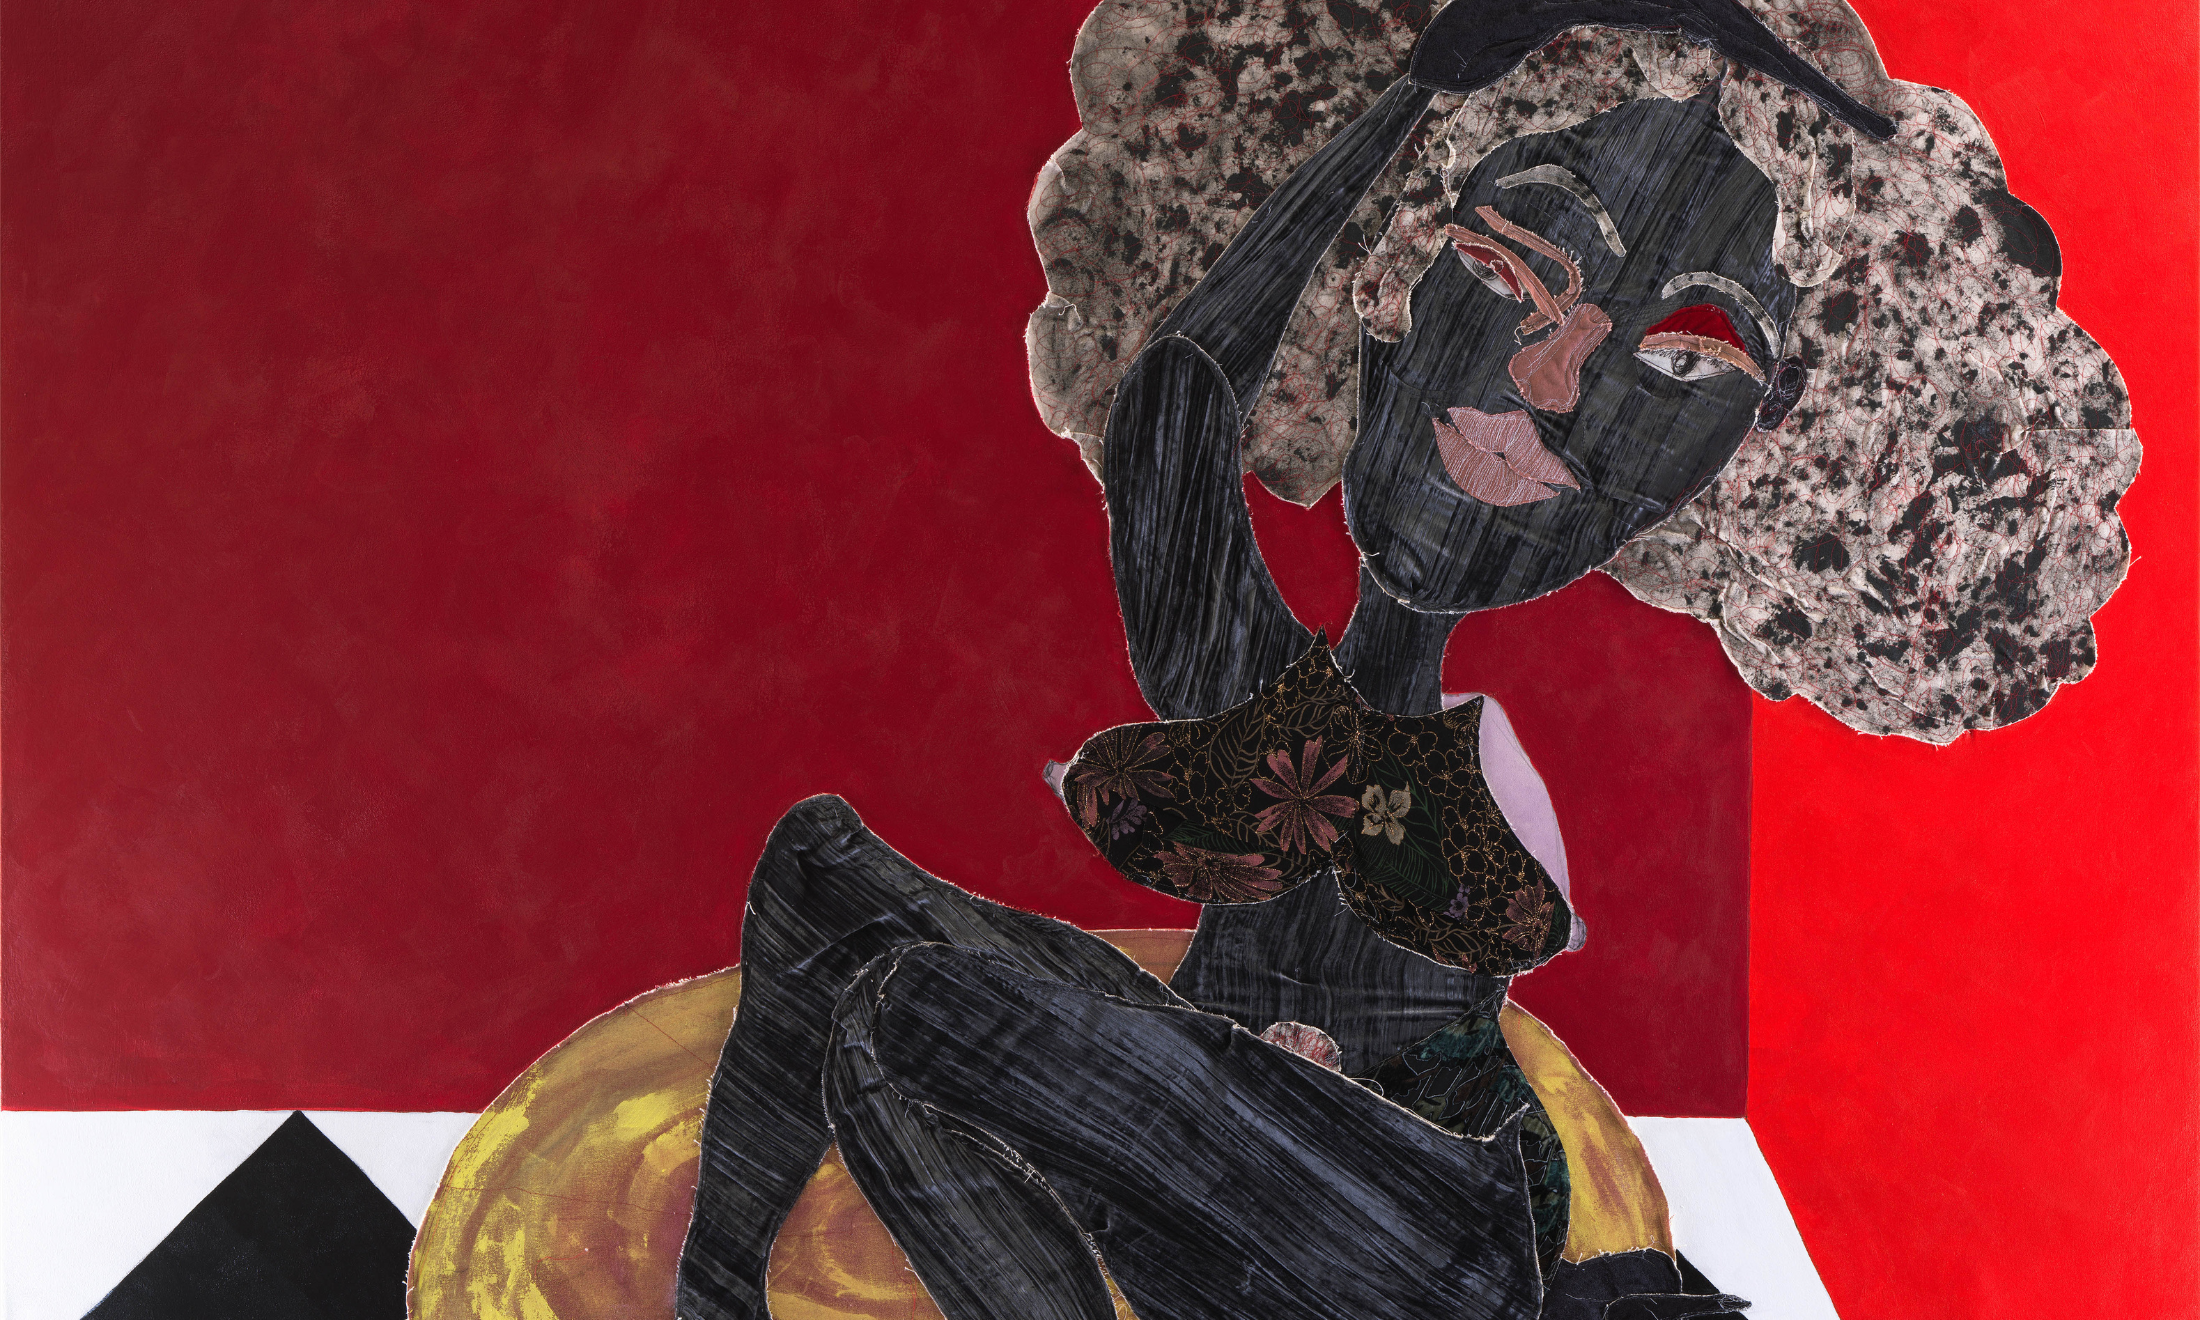 Tschabalala Self’s painted women find power in domesticity